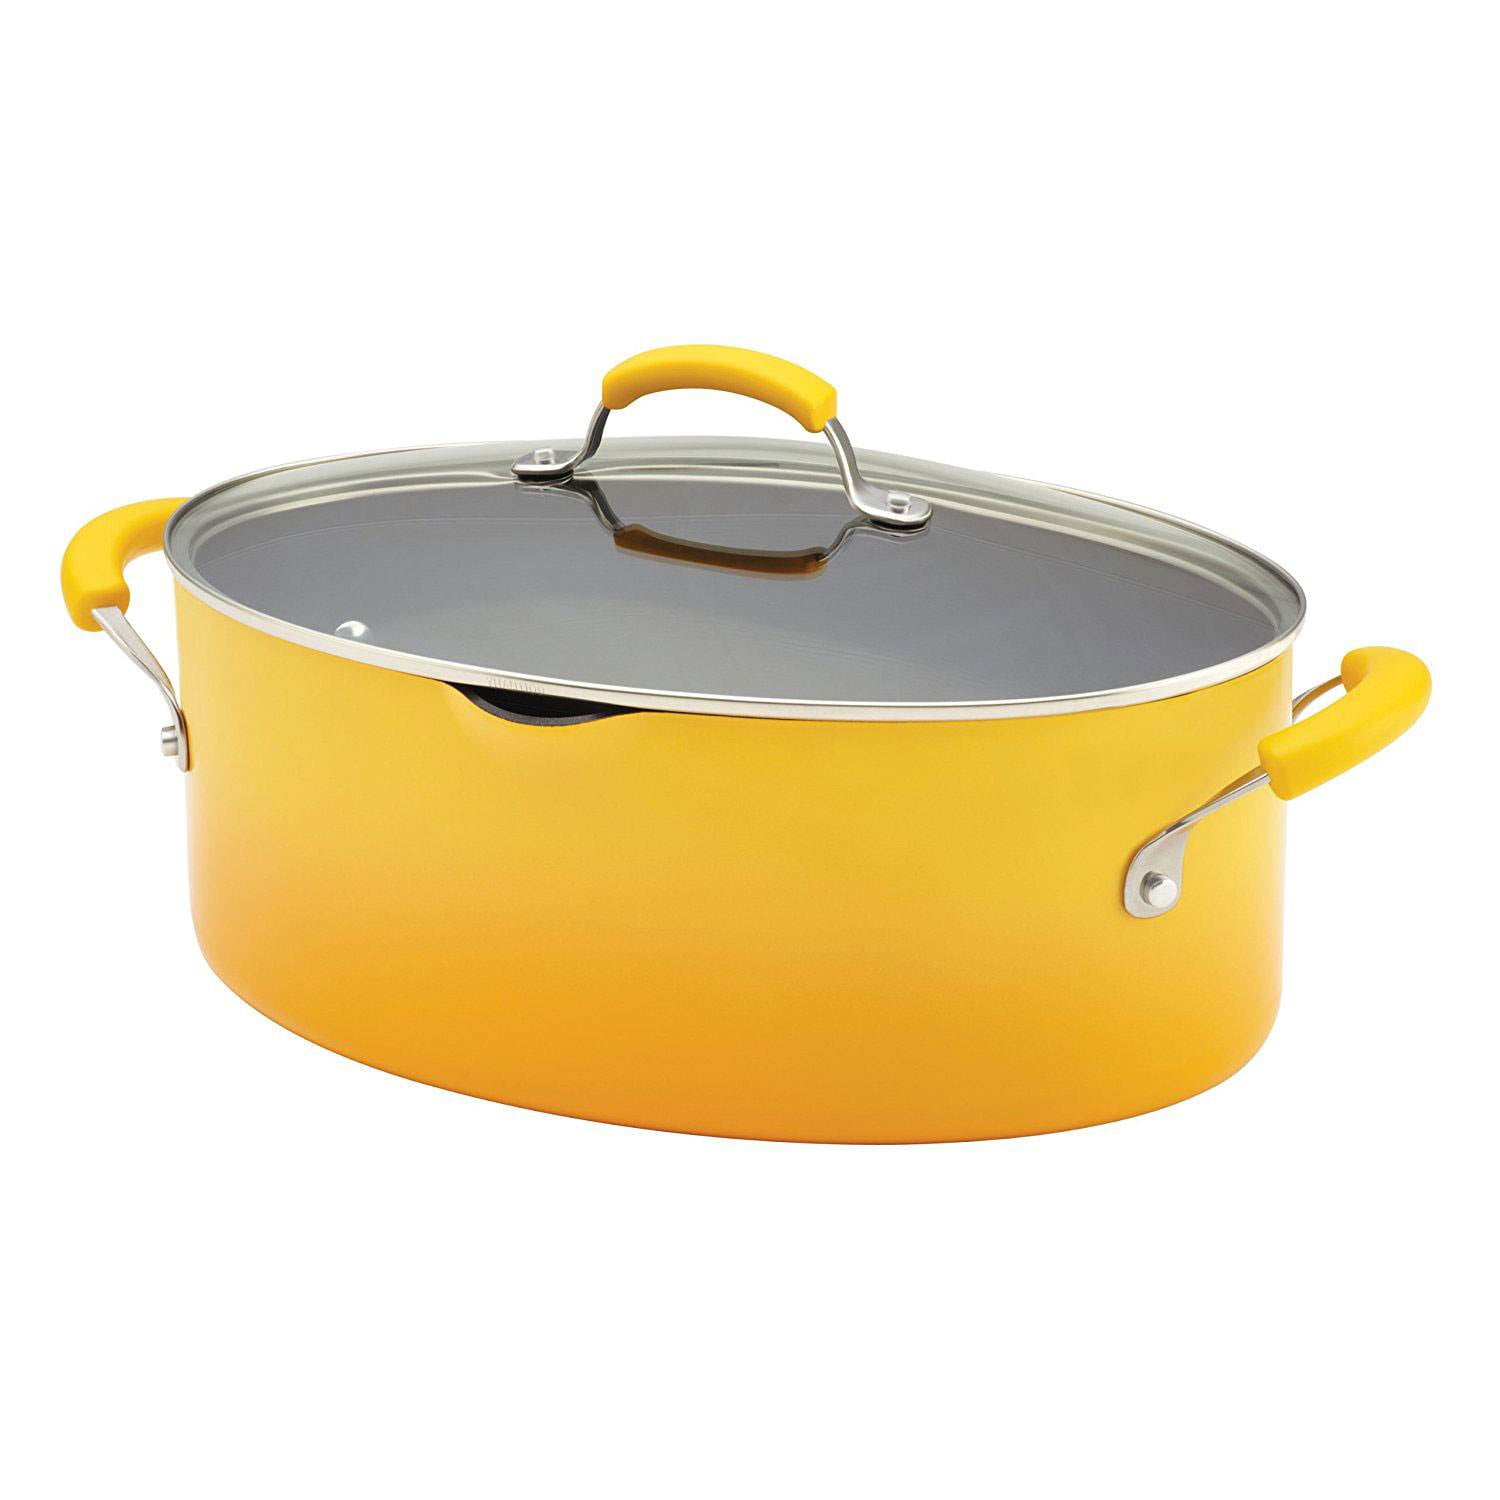 Rachael Ray Hard-Anodized Nonstick 8-Quart Covered Oval Pasta Pot